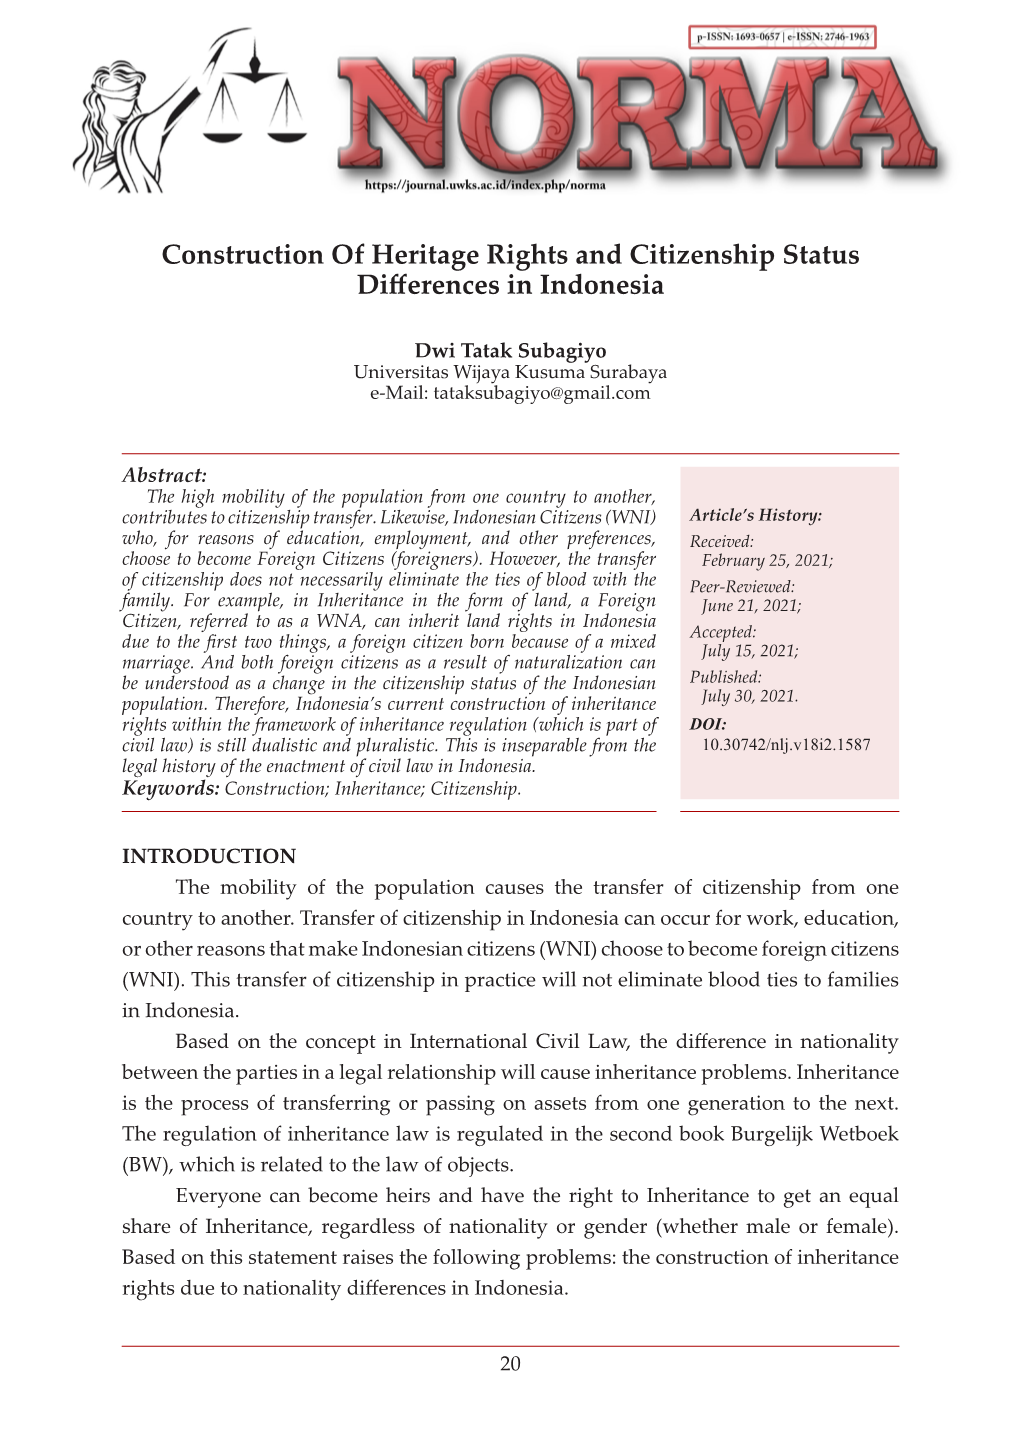 Construction of Heritage Rights and Citizenship Status Differences in Indonesia